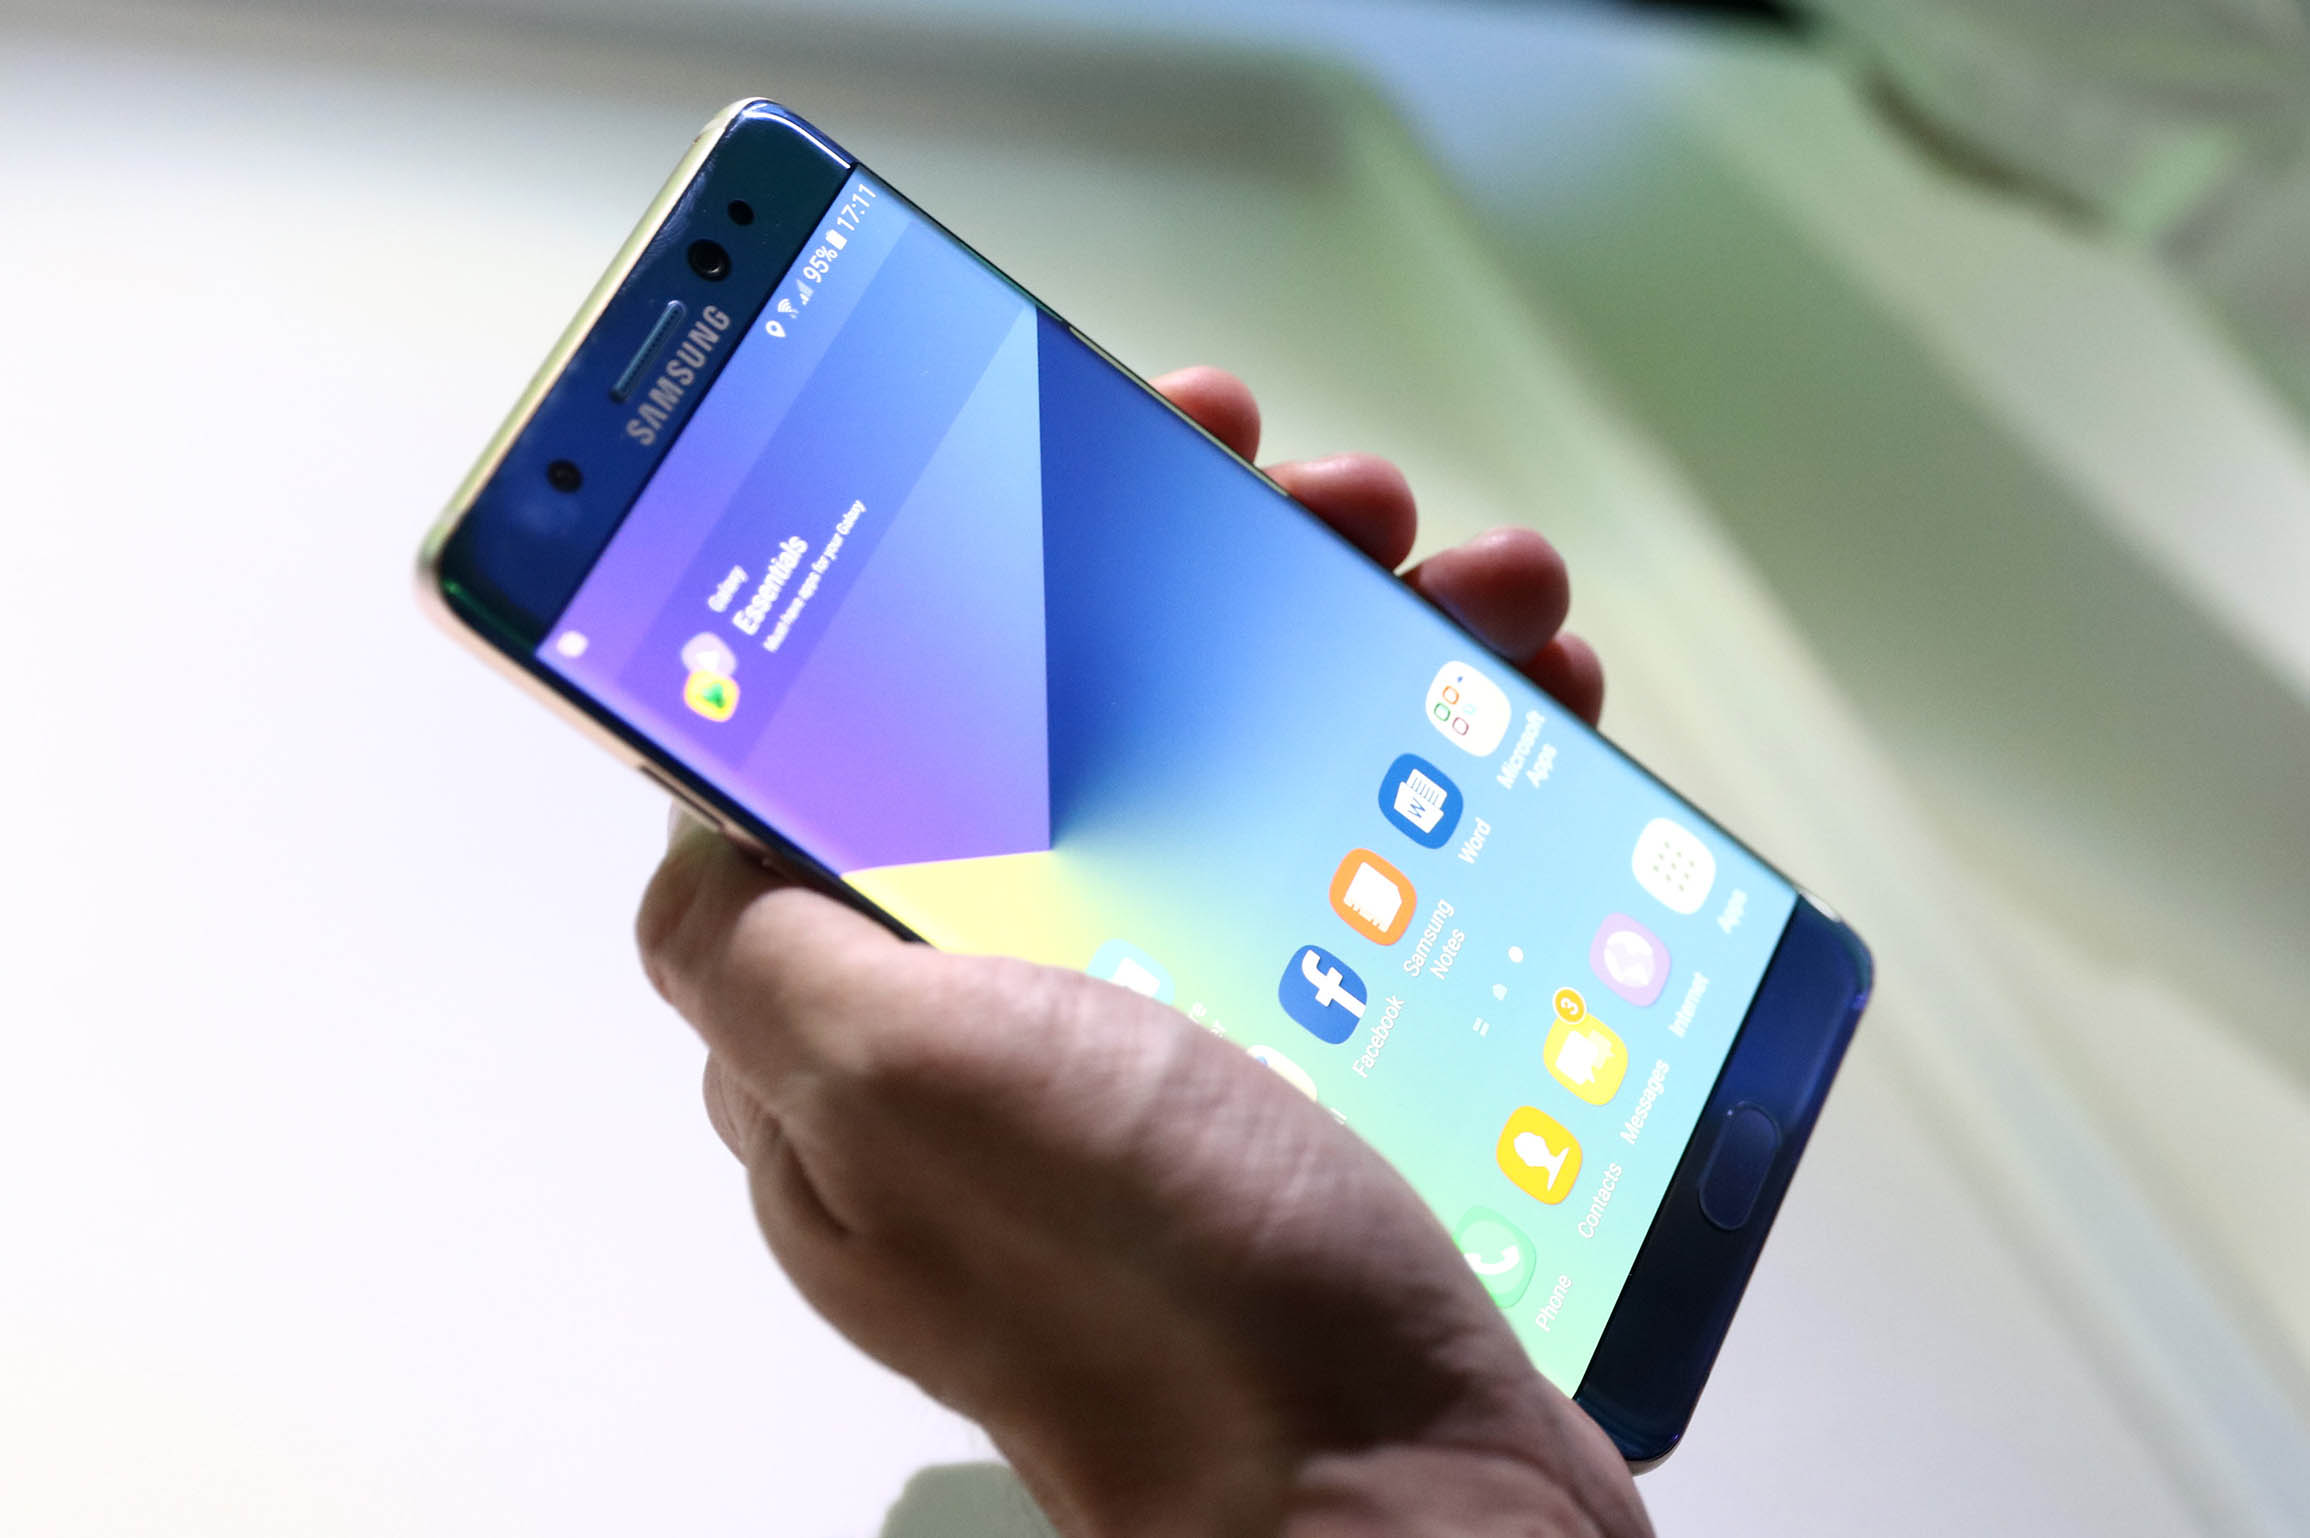 Samsung Note 7 'Calamity' Joins Notorious Recalls of Cars, Foods